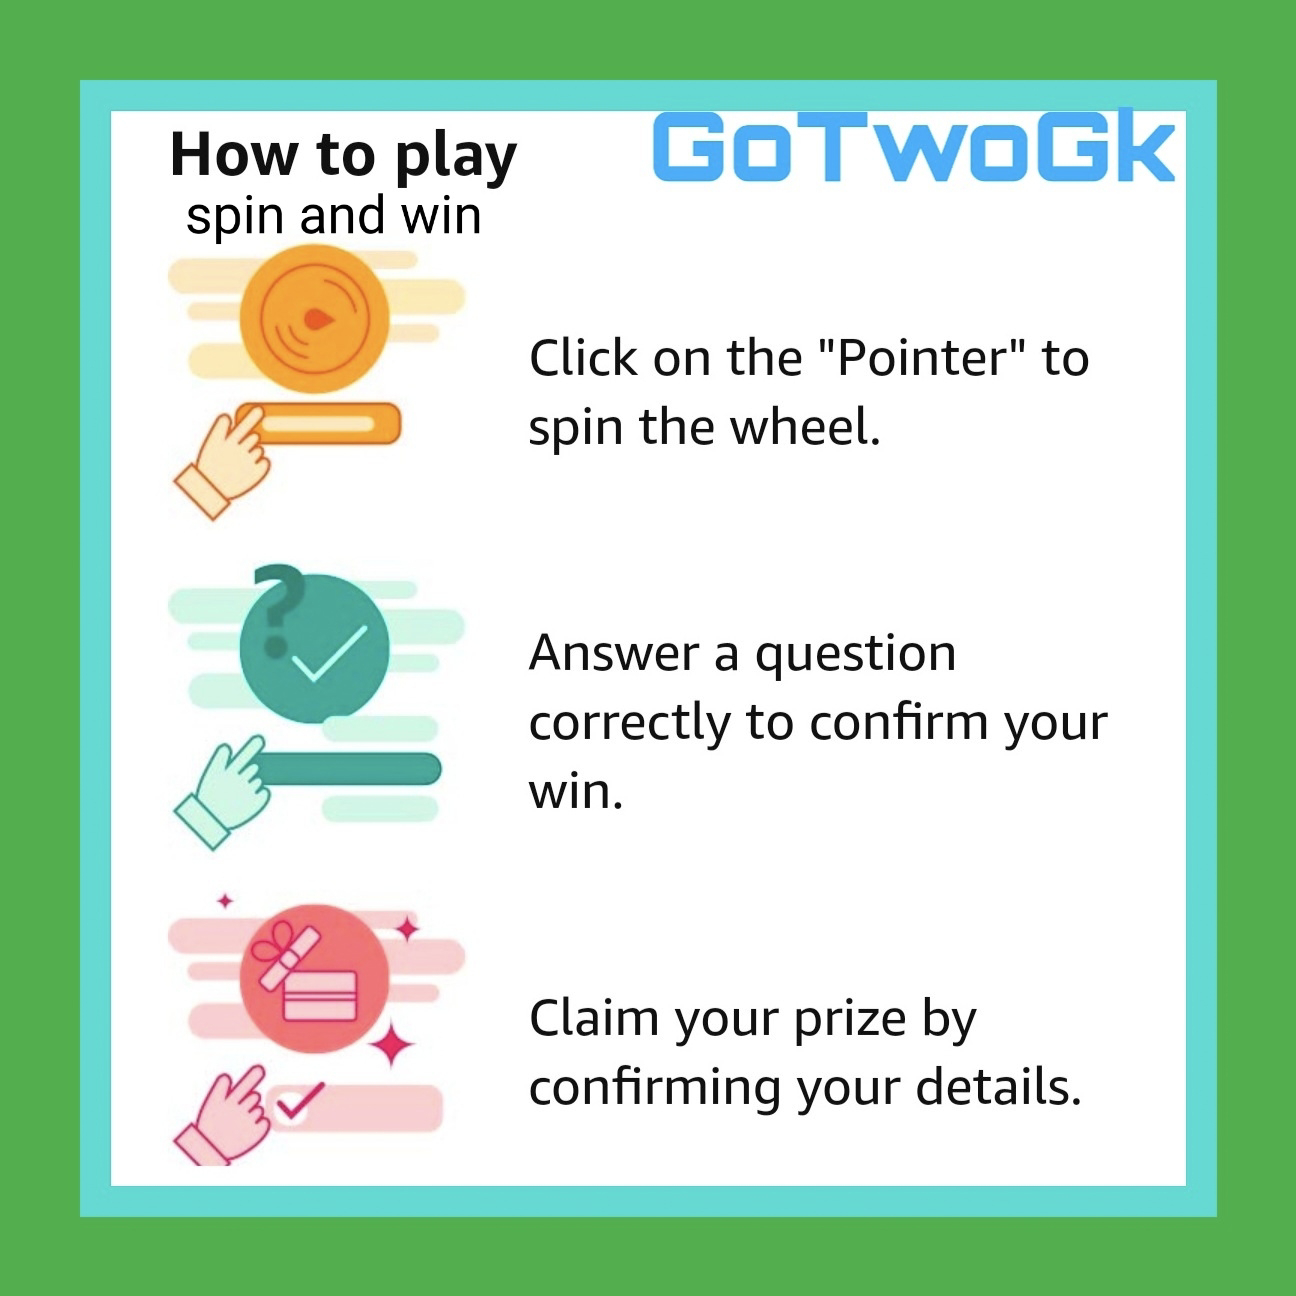 How to Play spin and win Contest?